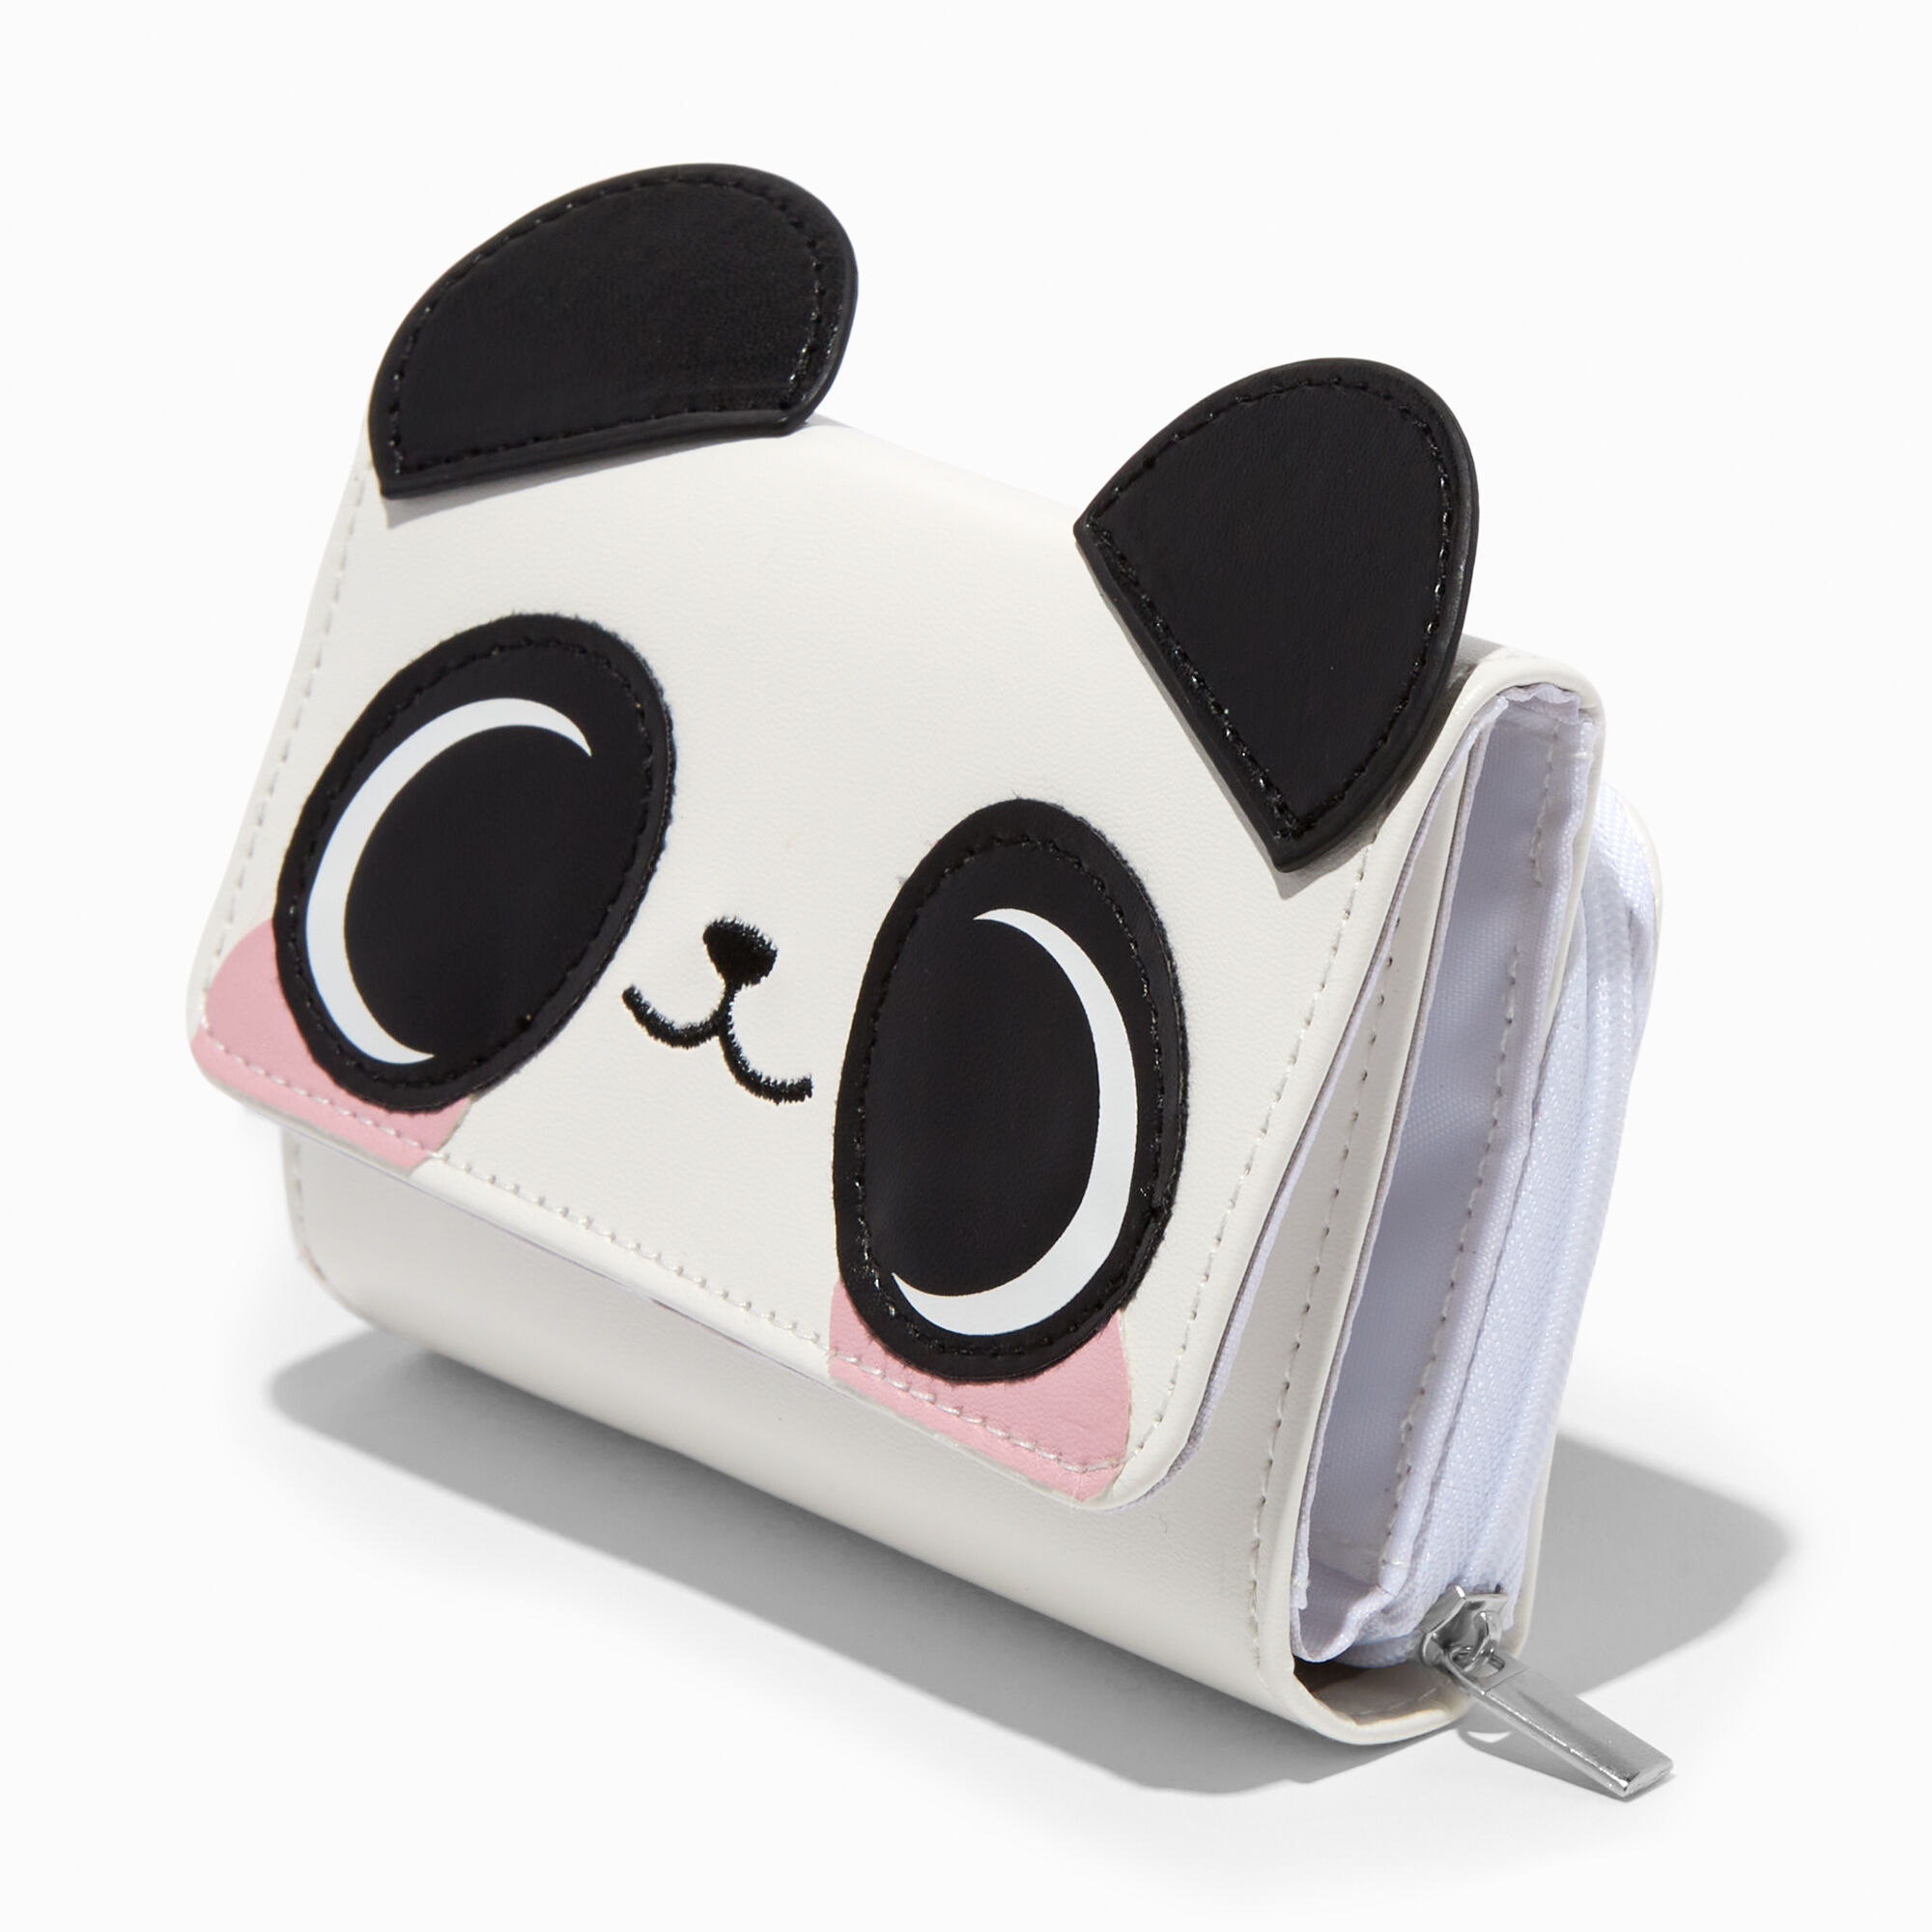 View Claires Panda Wallet information